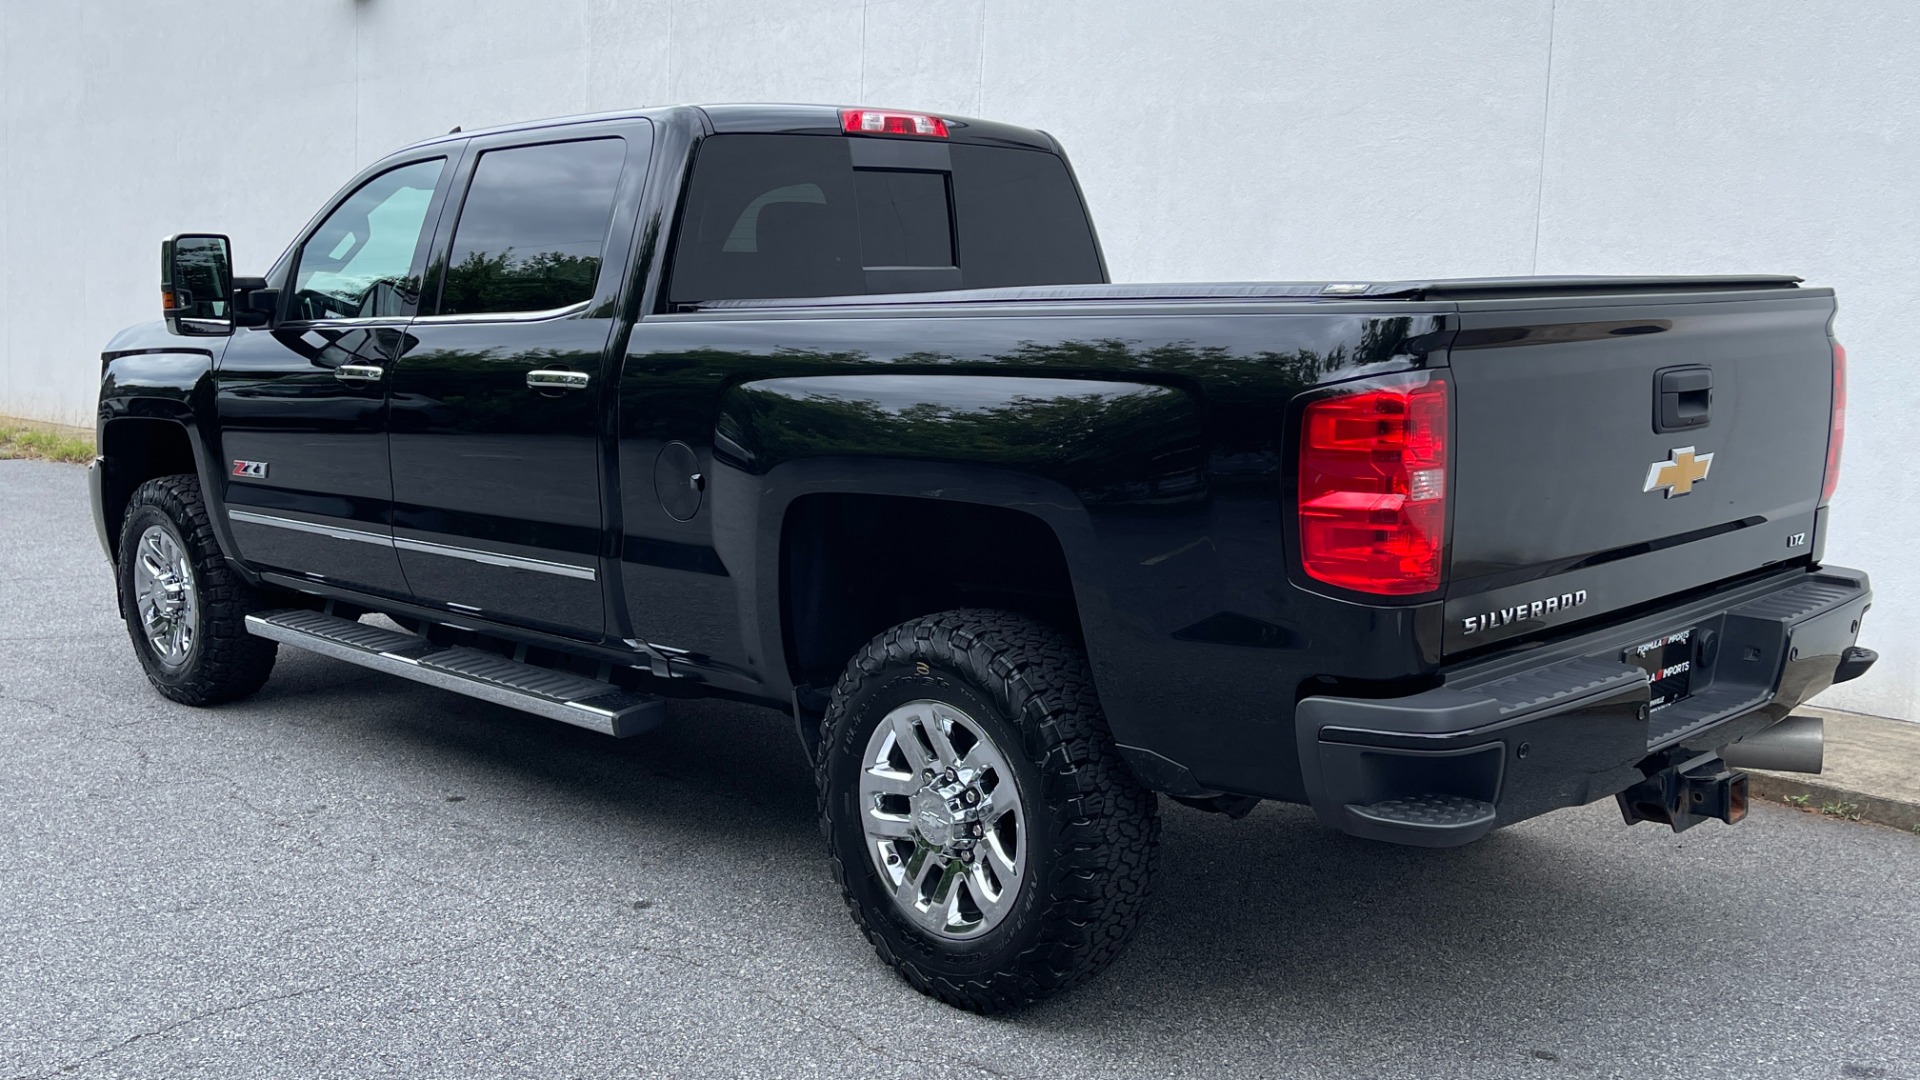 Used 2018 Chevrolet Silverado 3500HD LTZ / DURAMAX PLUS PACKAGE / SPORT EDITION / Z71 OFFROAD / SUNROOF / LEATHE for sale $62,795 at Formula Imports in Charlotte NC 28227 6